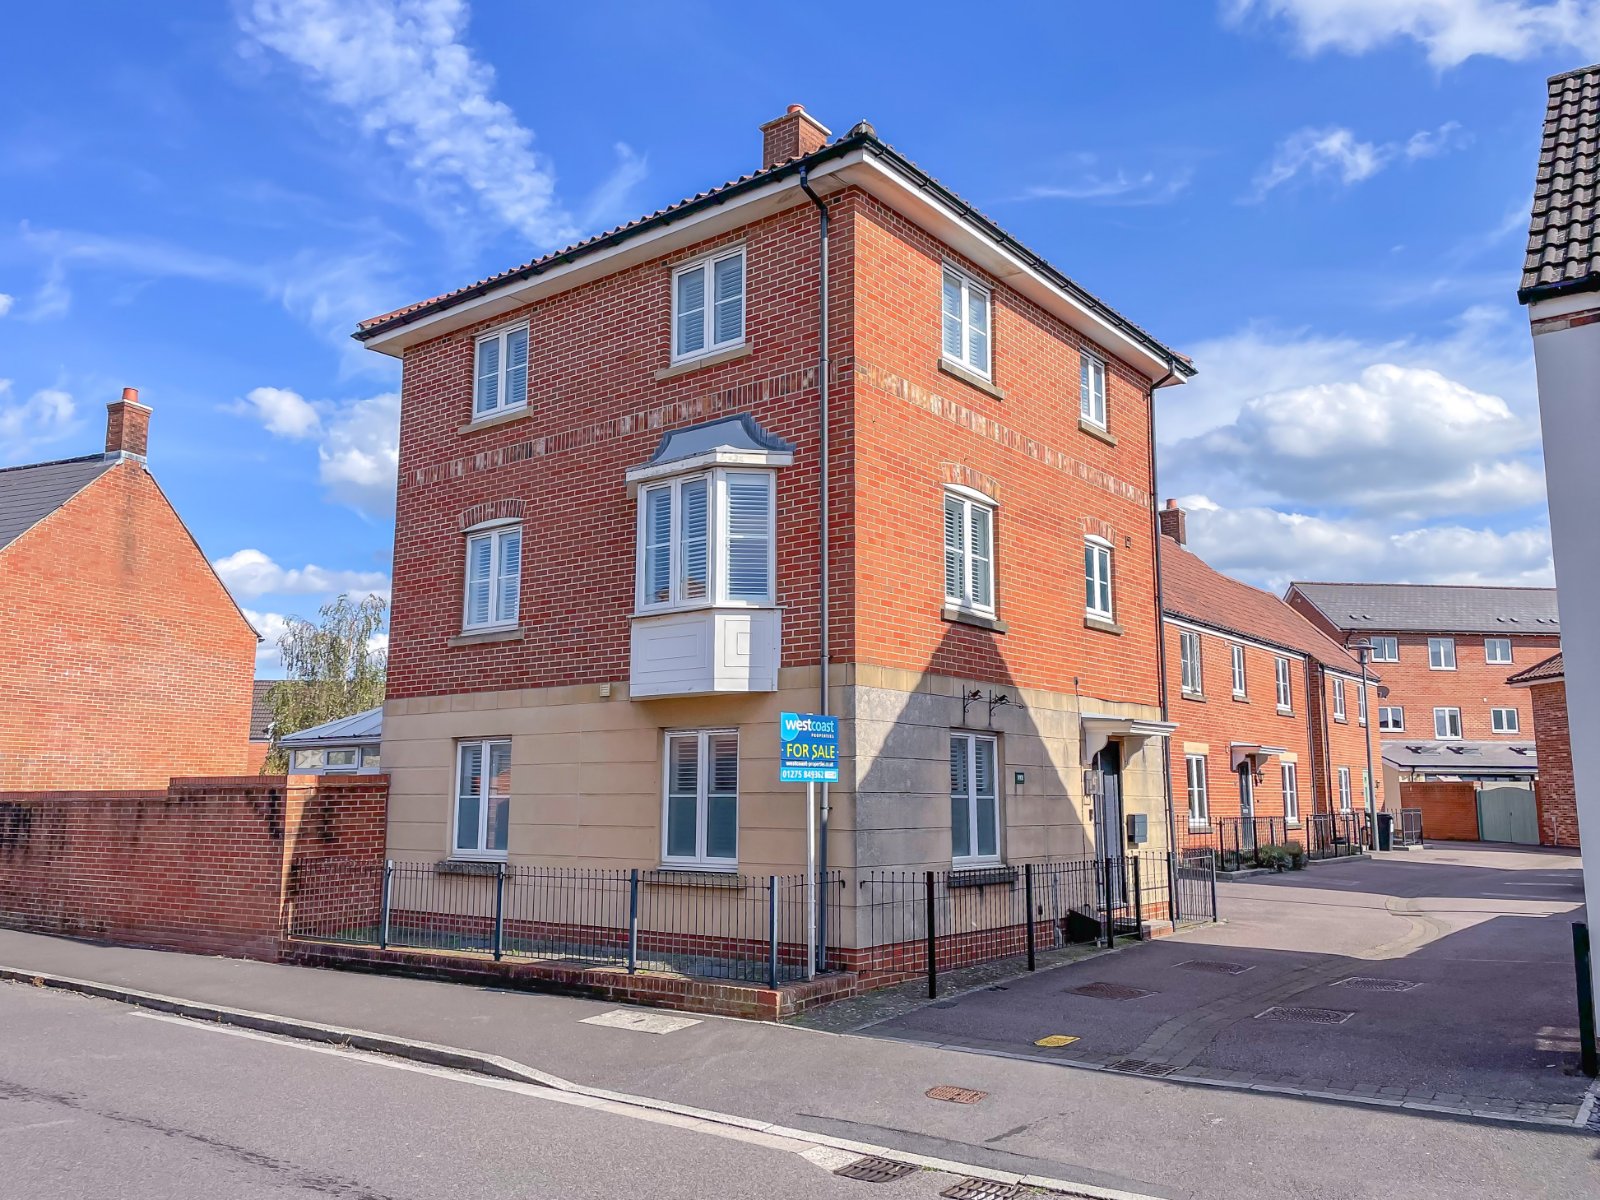 Bailey Court, Portishead, North Somerset, BS20